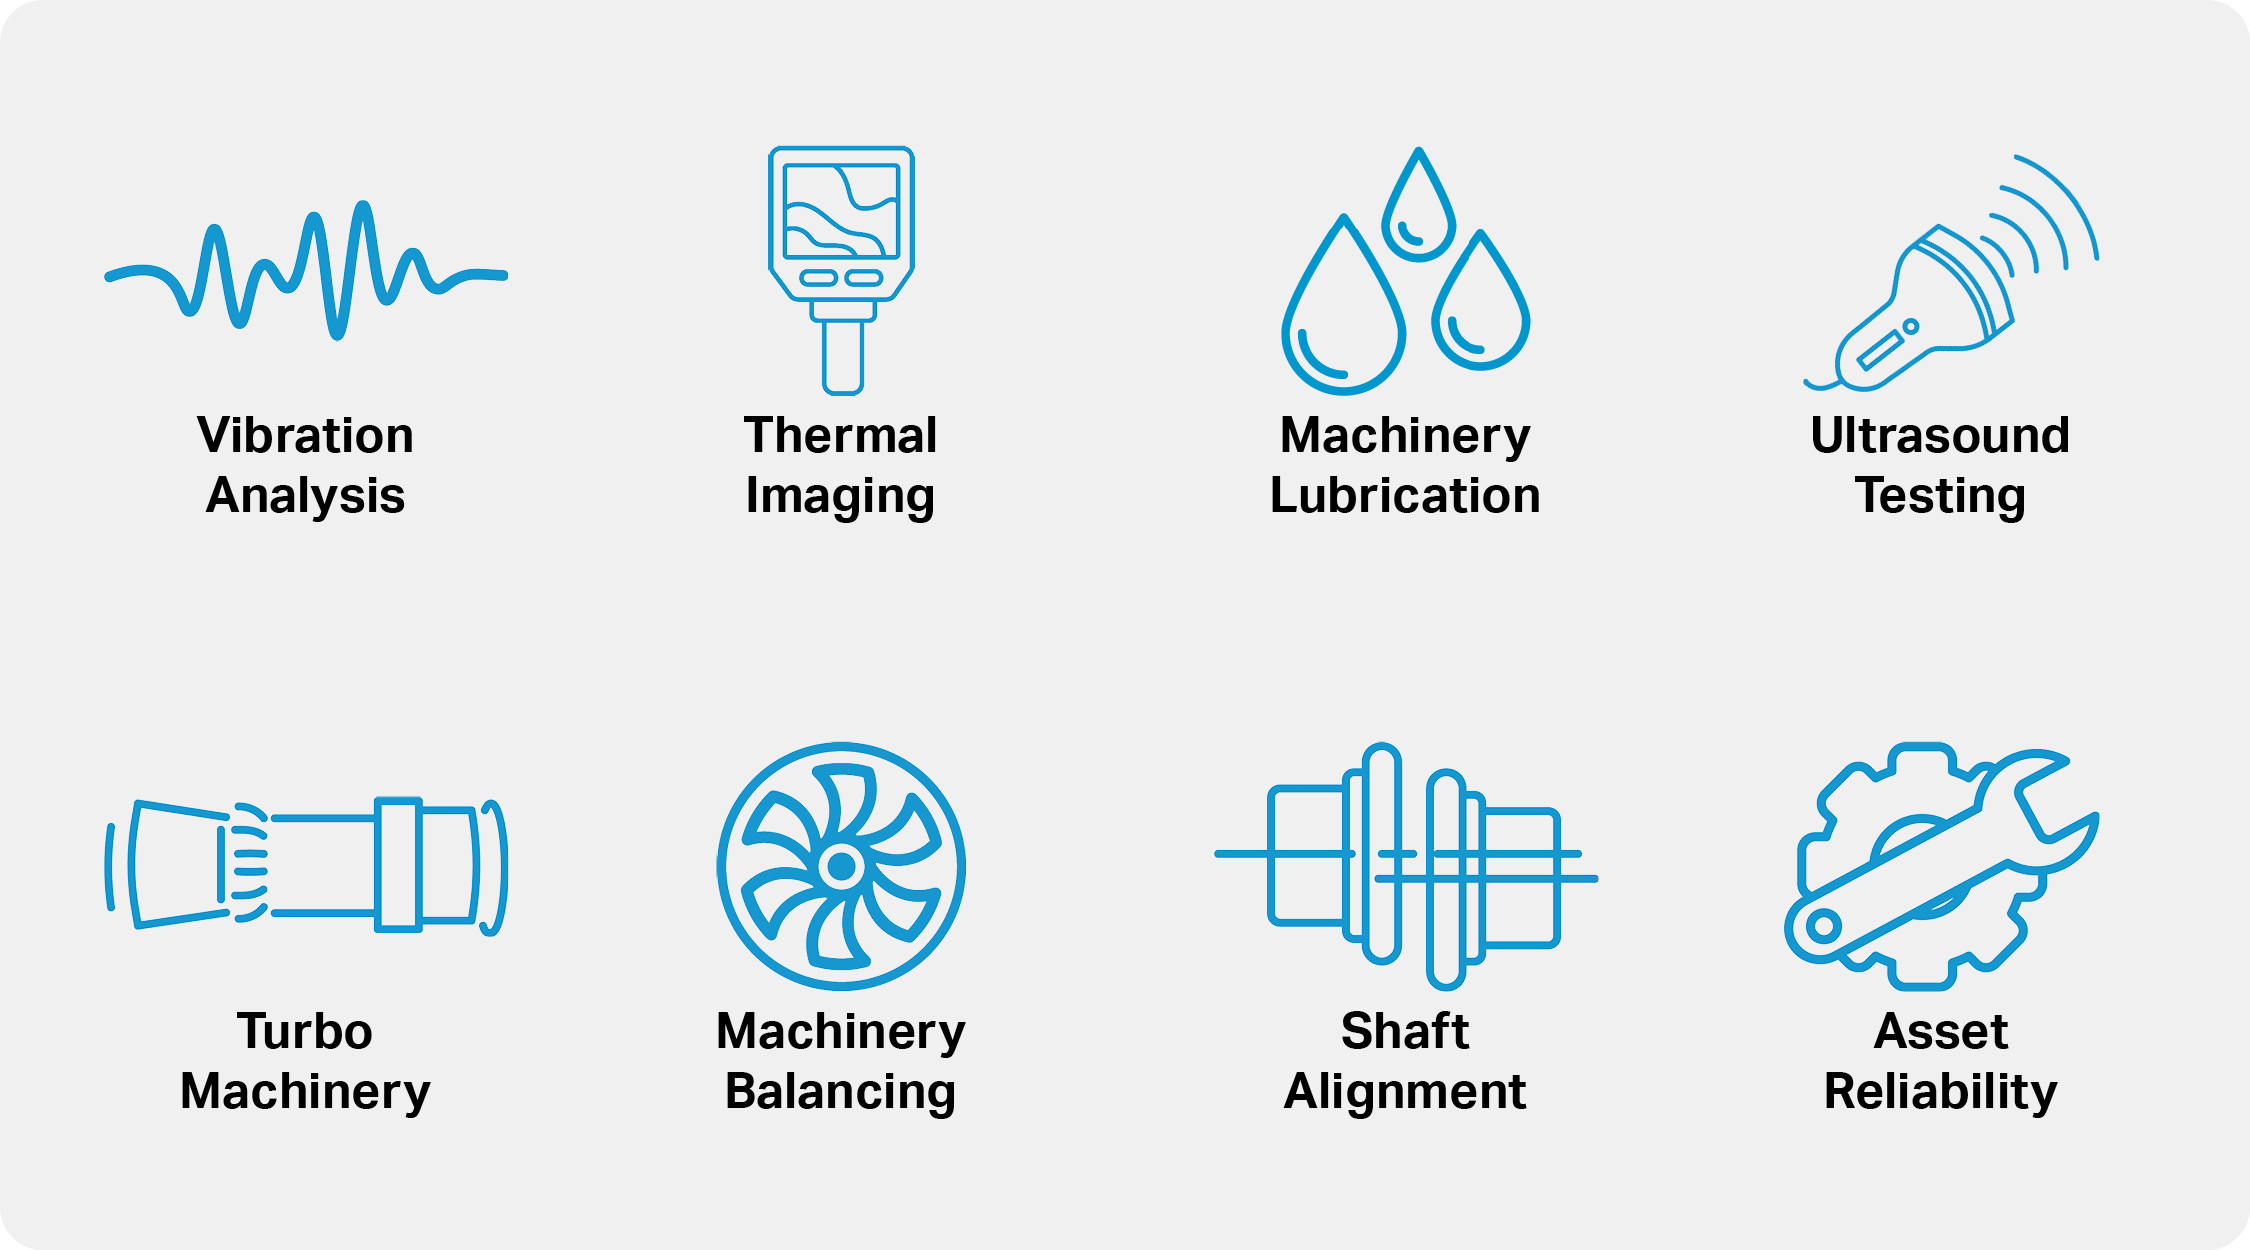 Icons depicting vibration wave, thermal imaging scanner, water droplets, ultrasound scanner, machinery, fan, shaft, and gear.